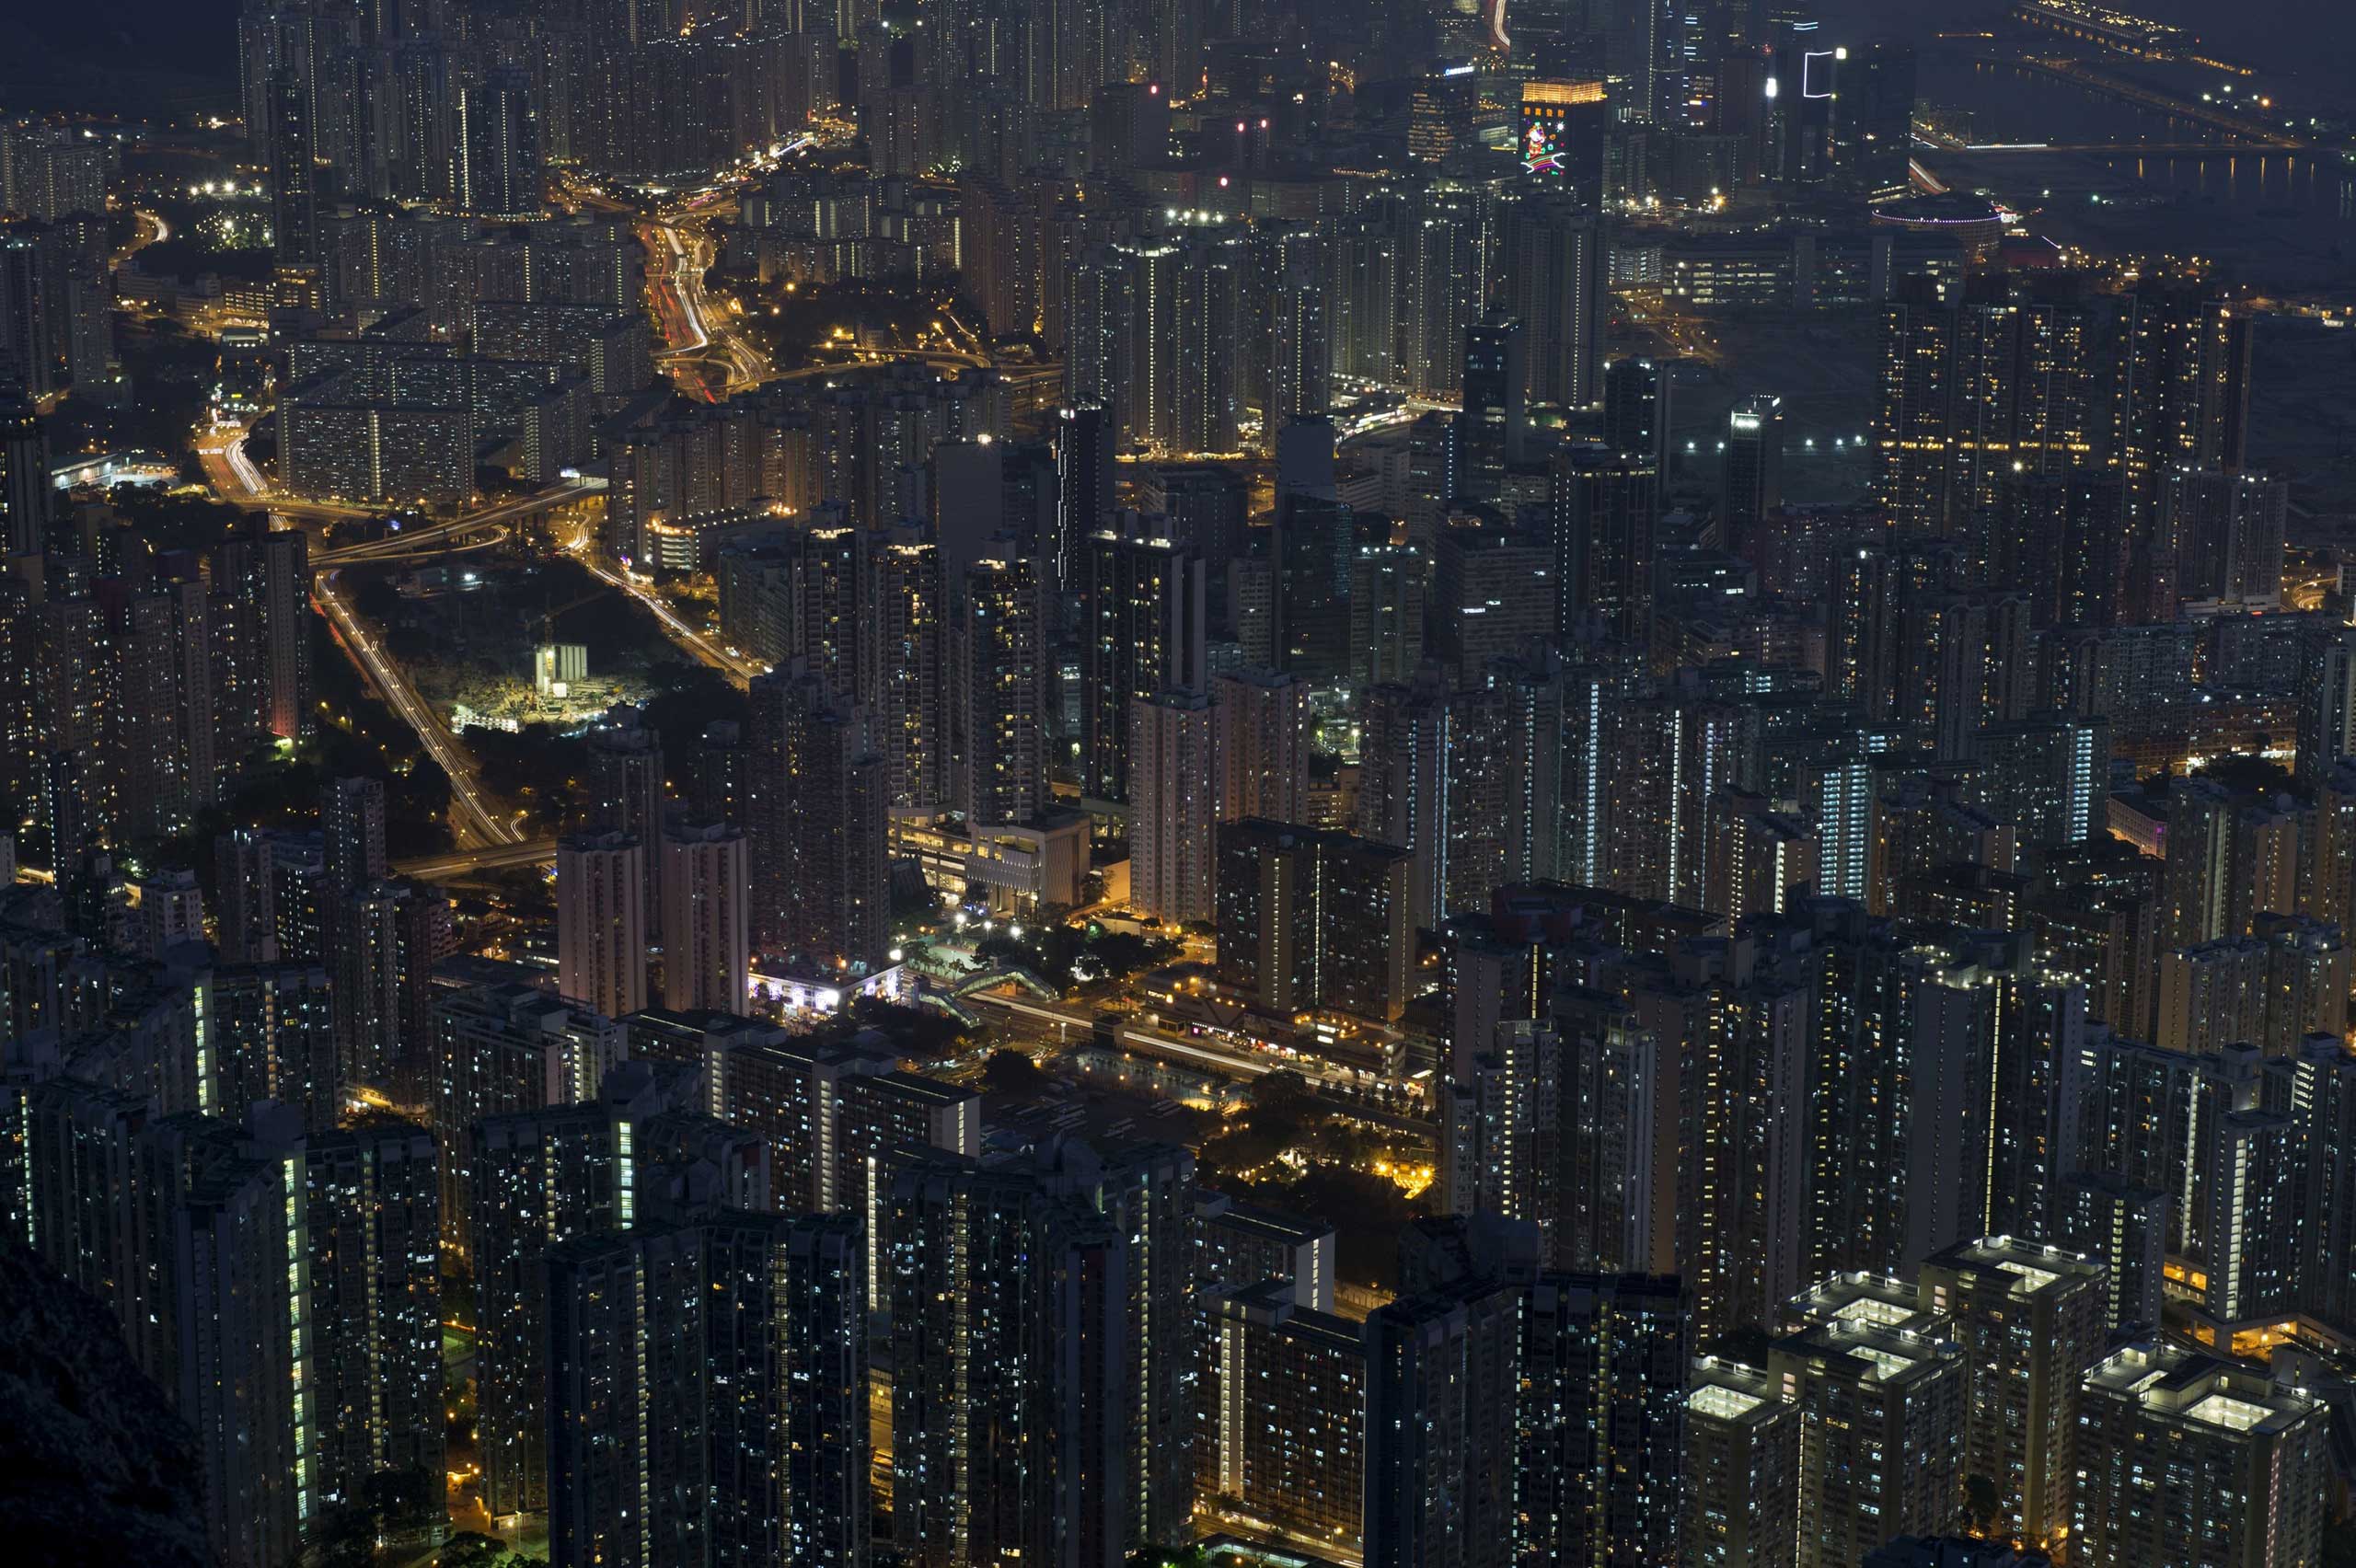 This long exposure picture shows apartment buildings and office blocks clustered together in Hong Kong's Kowloon district on Feb. 3, 2014.